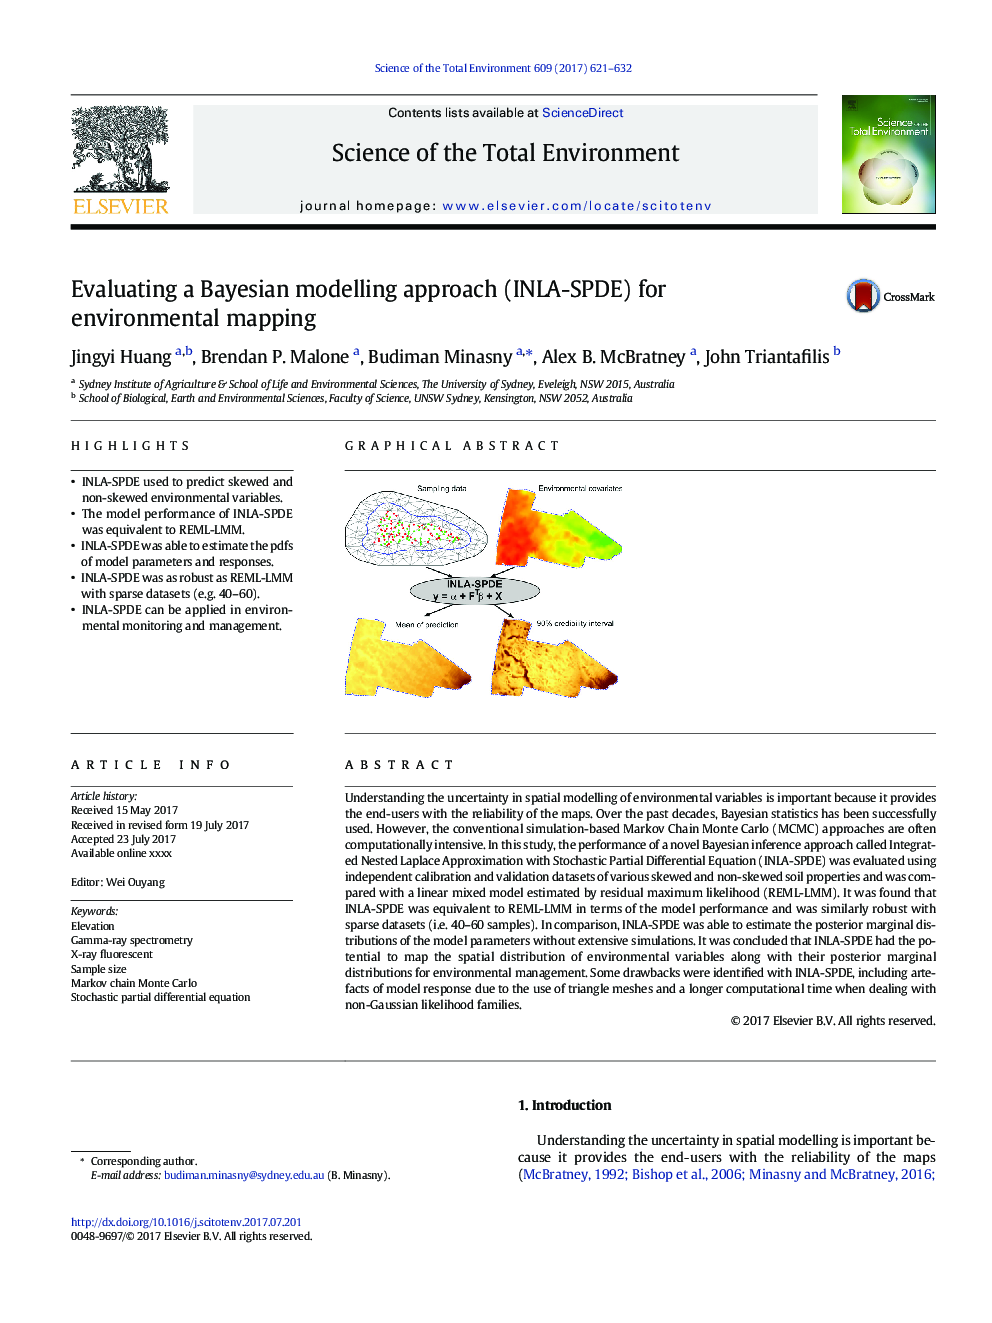 Evaluating a Bayesian modelling approach (INLA-SPDE) for environmental mapping